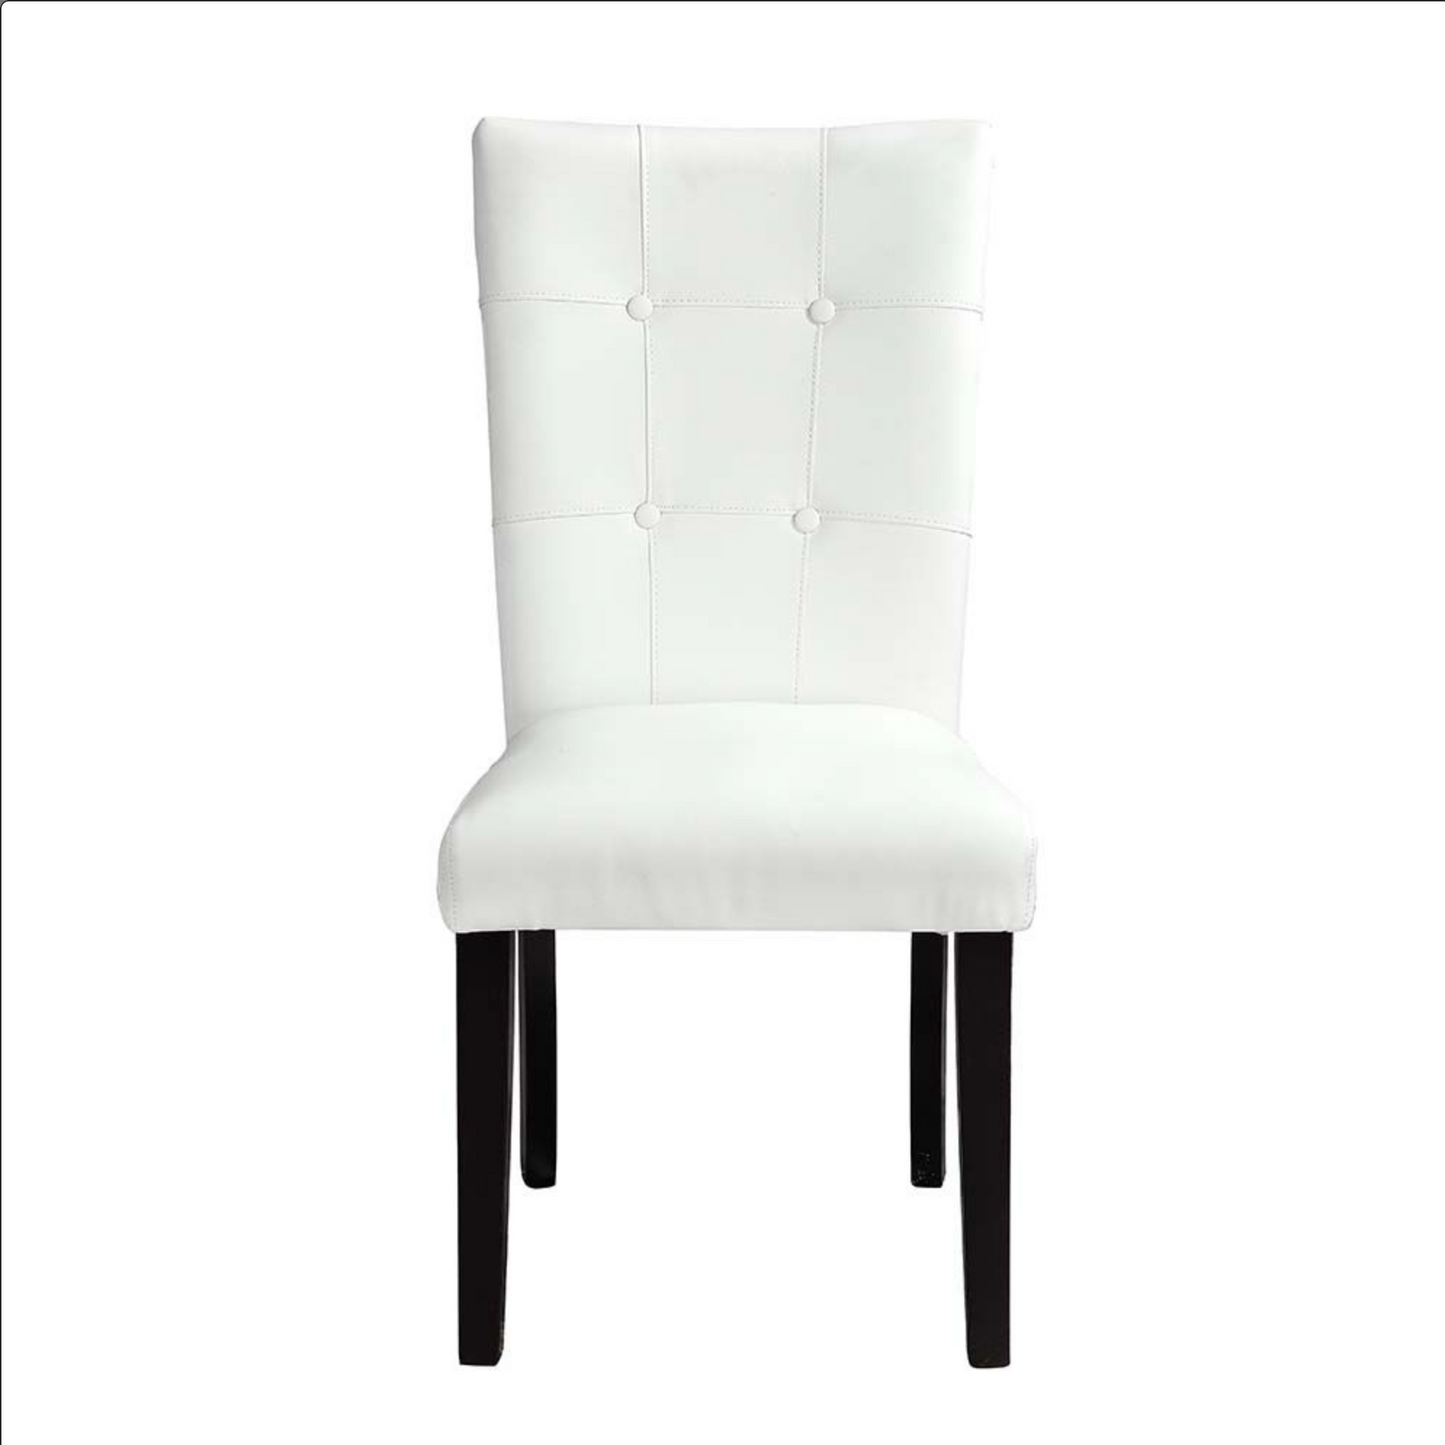 Hussein Dining Chair